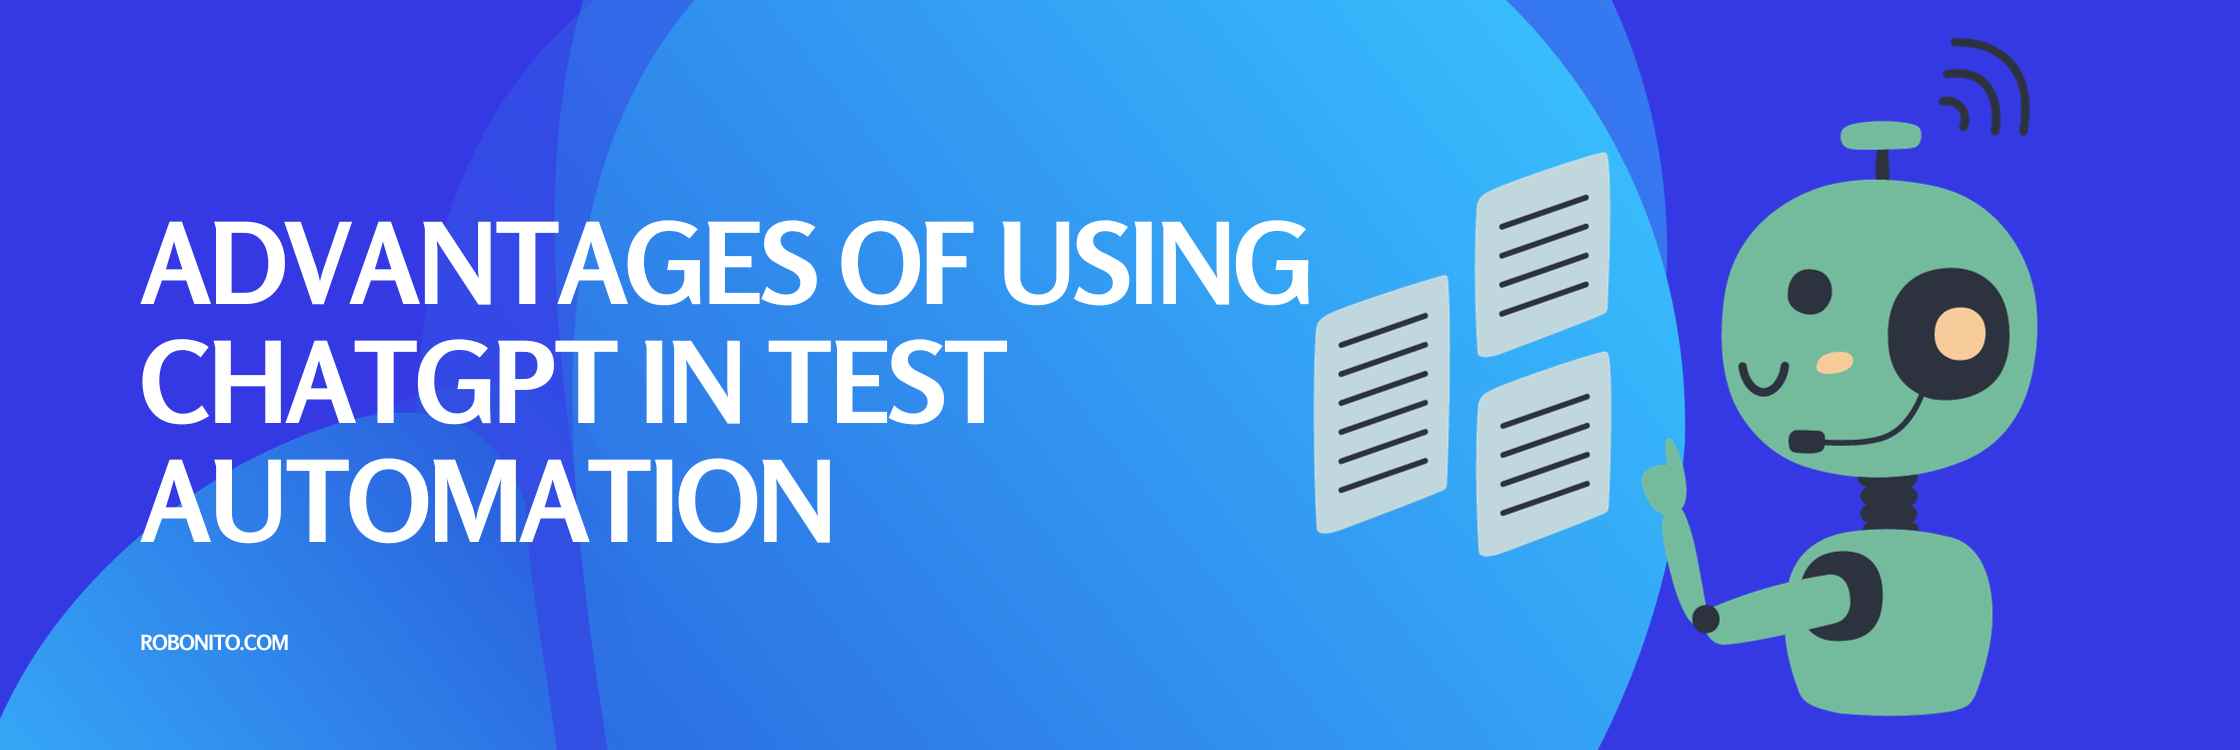 Using ChatGPT for Test Automation